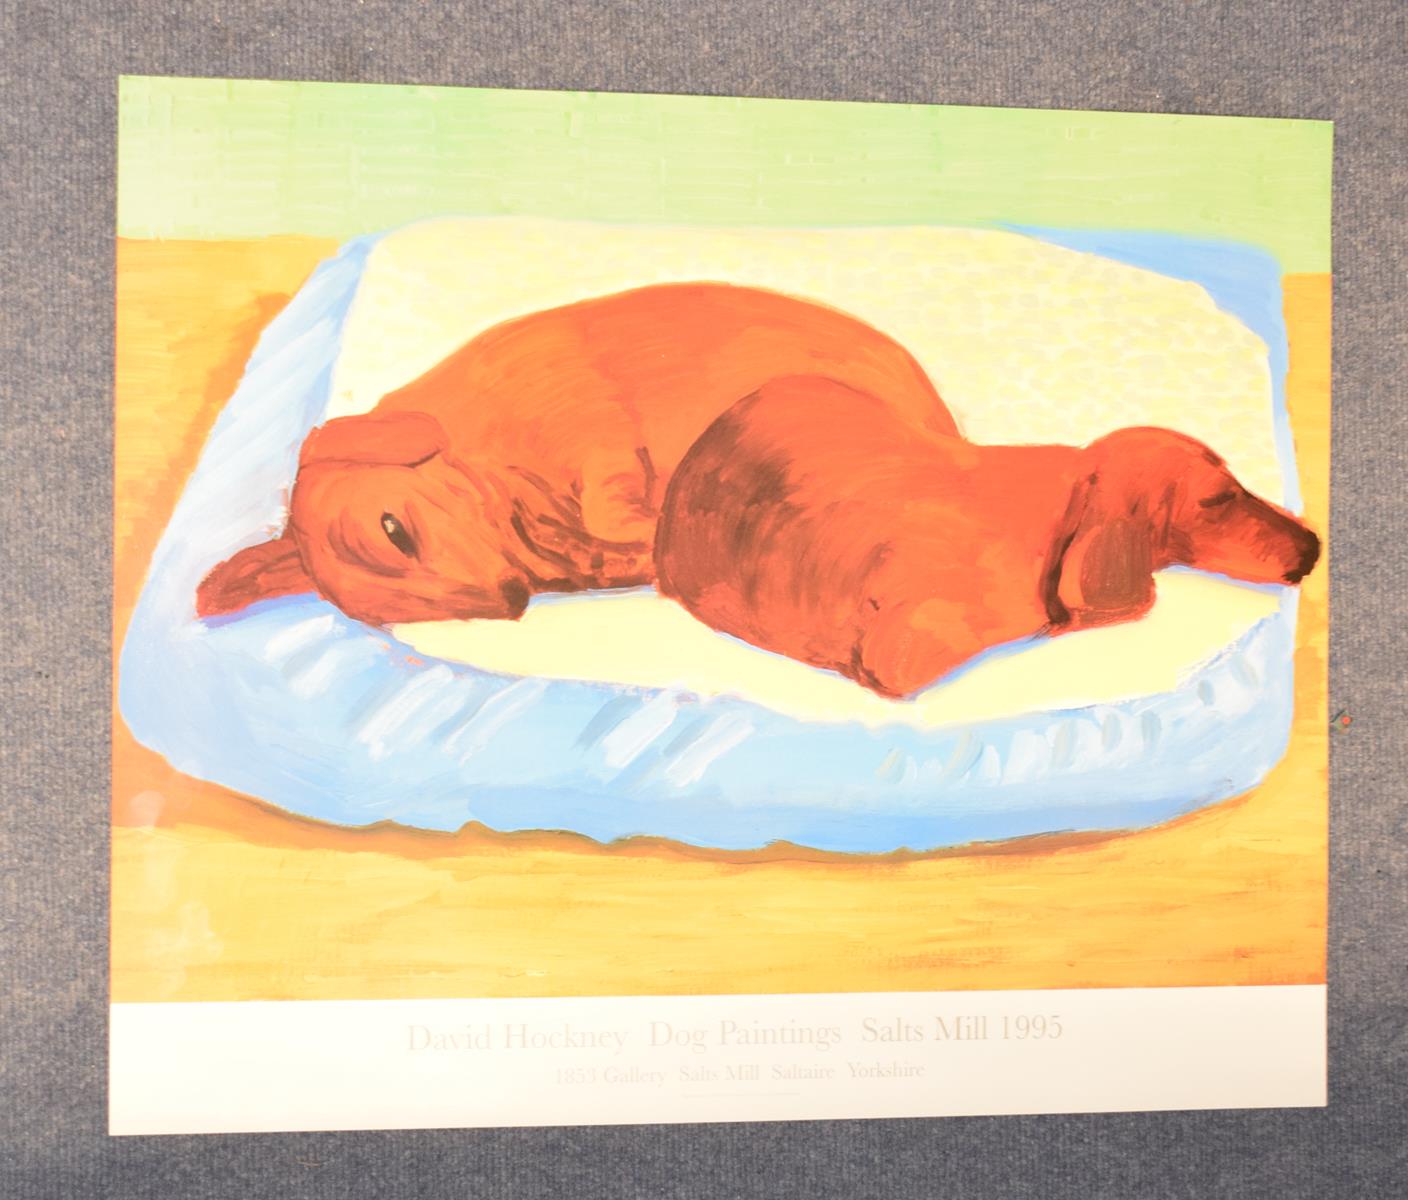 After David Hockney, dog paintings, Salts Mill 1995, colour poster, 53 x 65 cm and another (both - Image 2 of 3